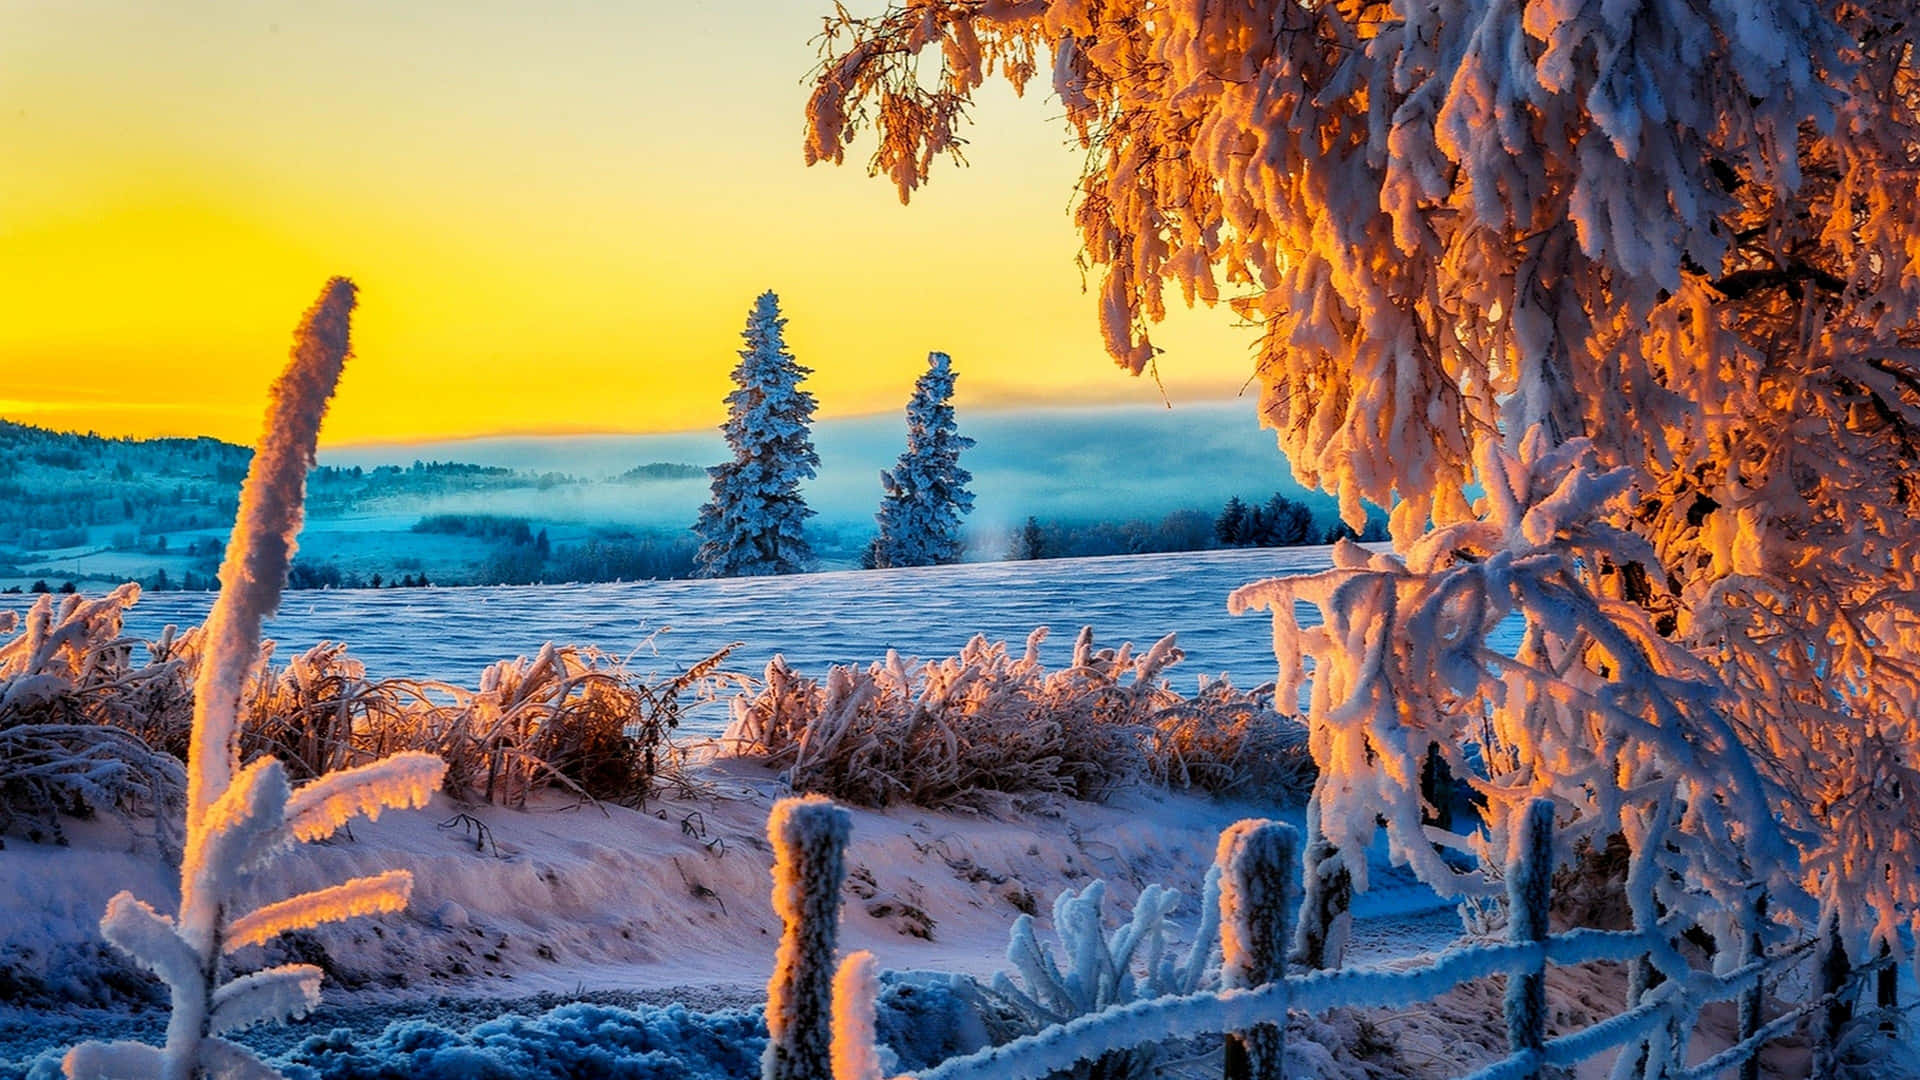 Winter Sunset: A snowy landscape bathed in the warm glow of the setting sun Wallpaper